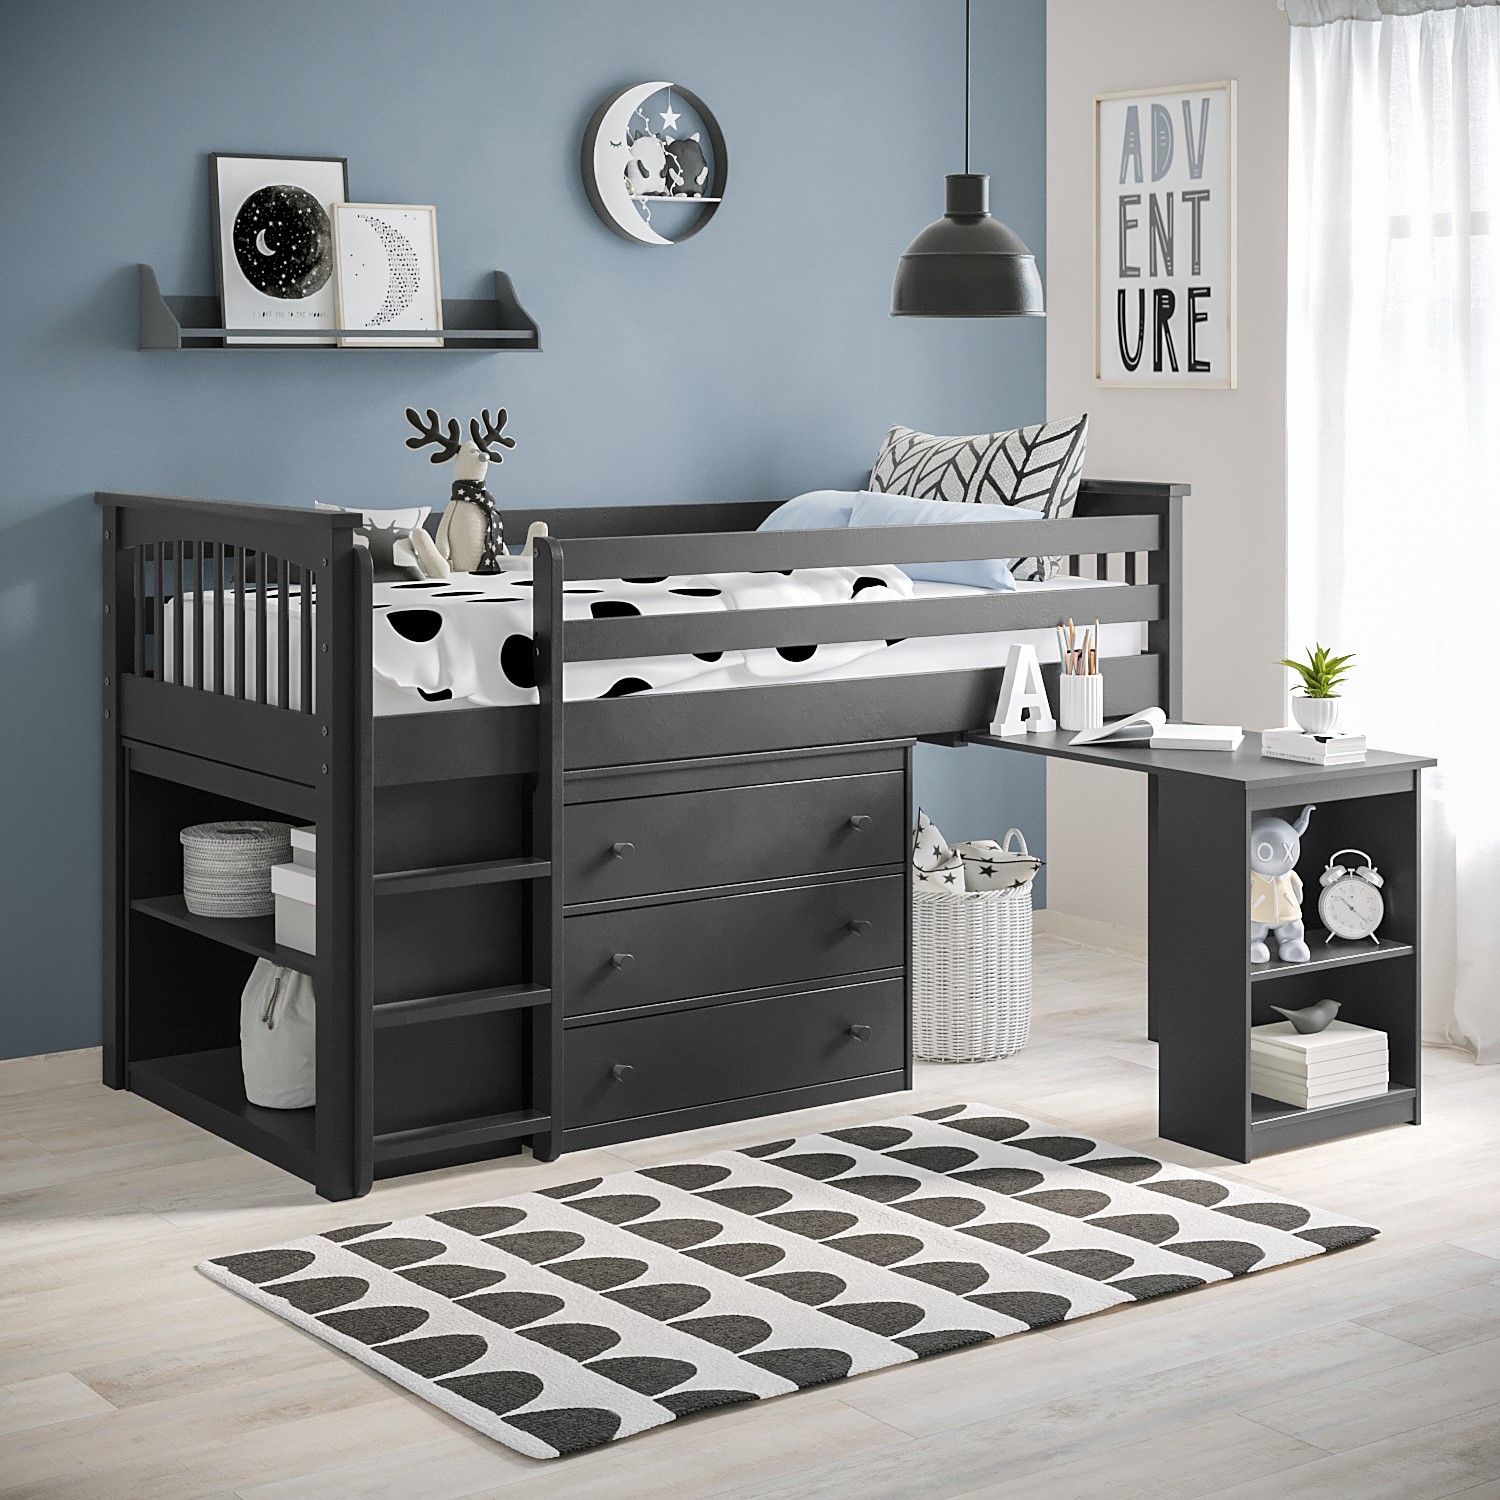 Windermere Midsleeper In Dark Grey With Pull Out Desk Furniture123